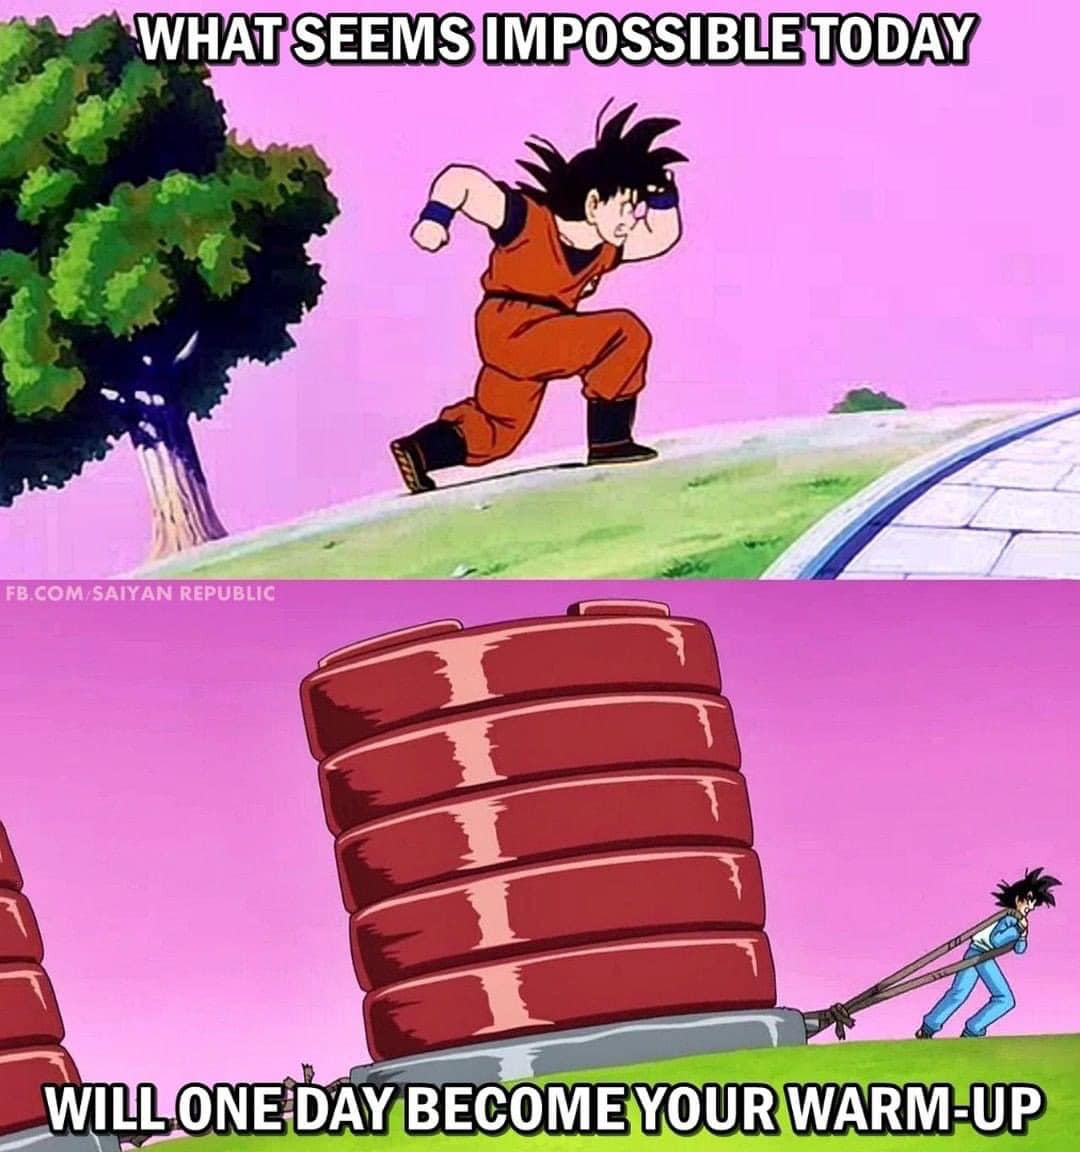 Anime,  Anime Memes Anime,  text: WHAT SEEMS IMPOSSIBLE TODAY FB.COM/SAIYAN REPUBLIC WILL ONEDAY BECOME YOUR WARM-UP 